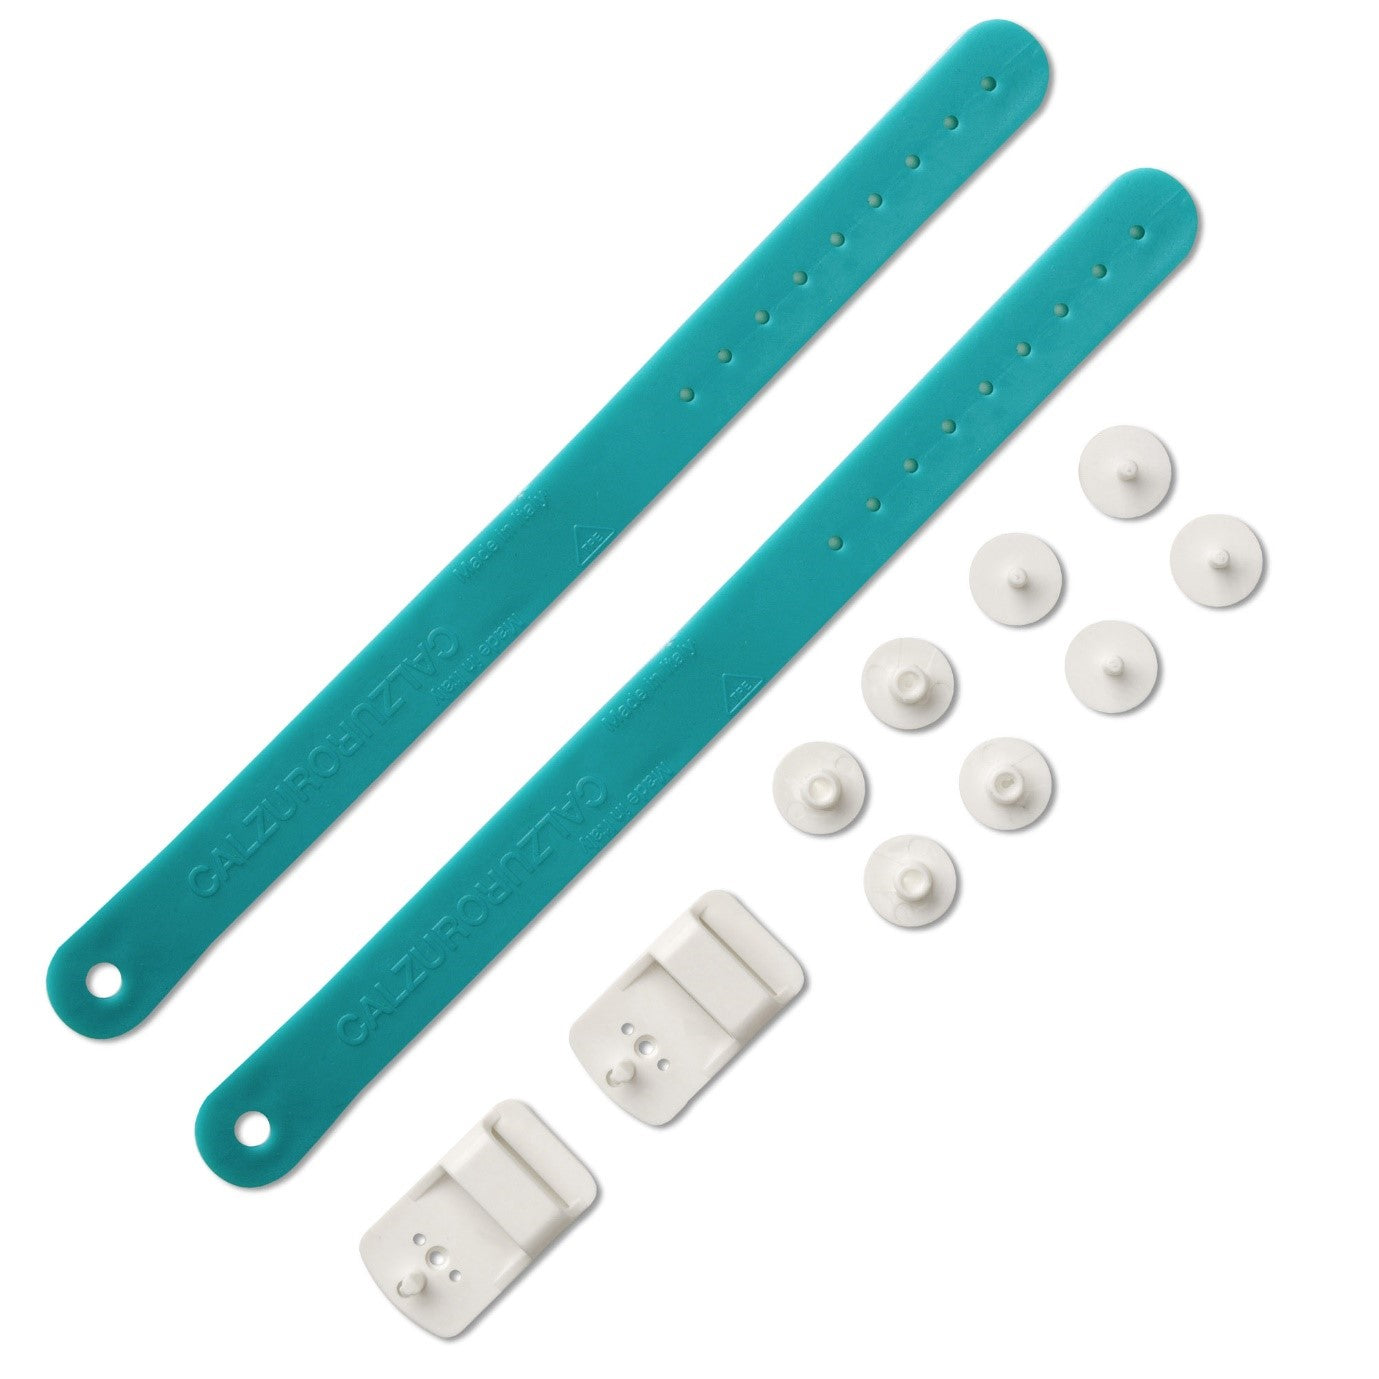 Heel Straps Kit for Calzuro Classic Clogs - Teal